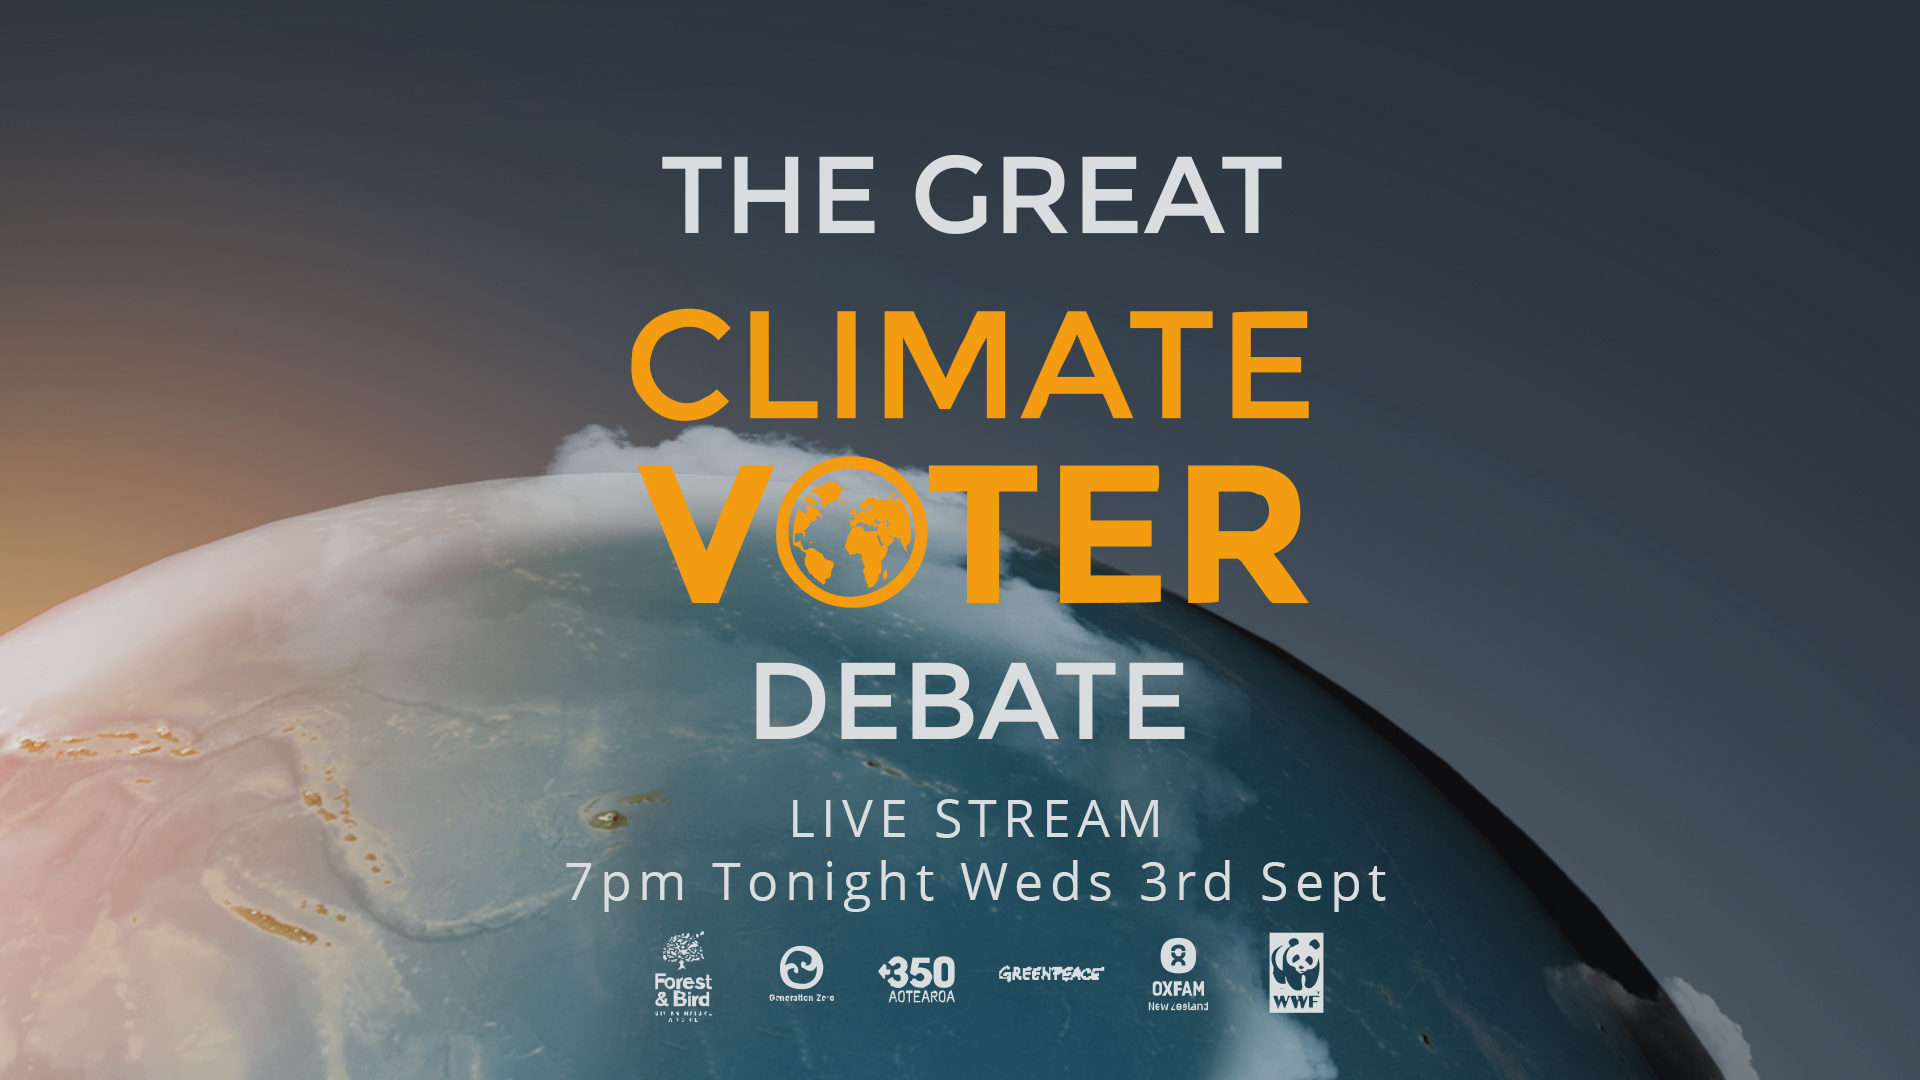 The Great Climate Change Election Debate